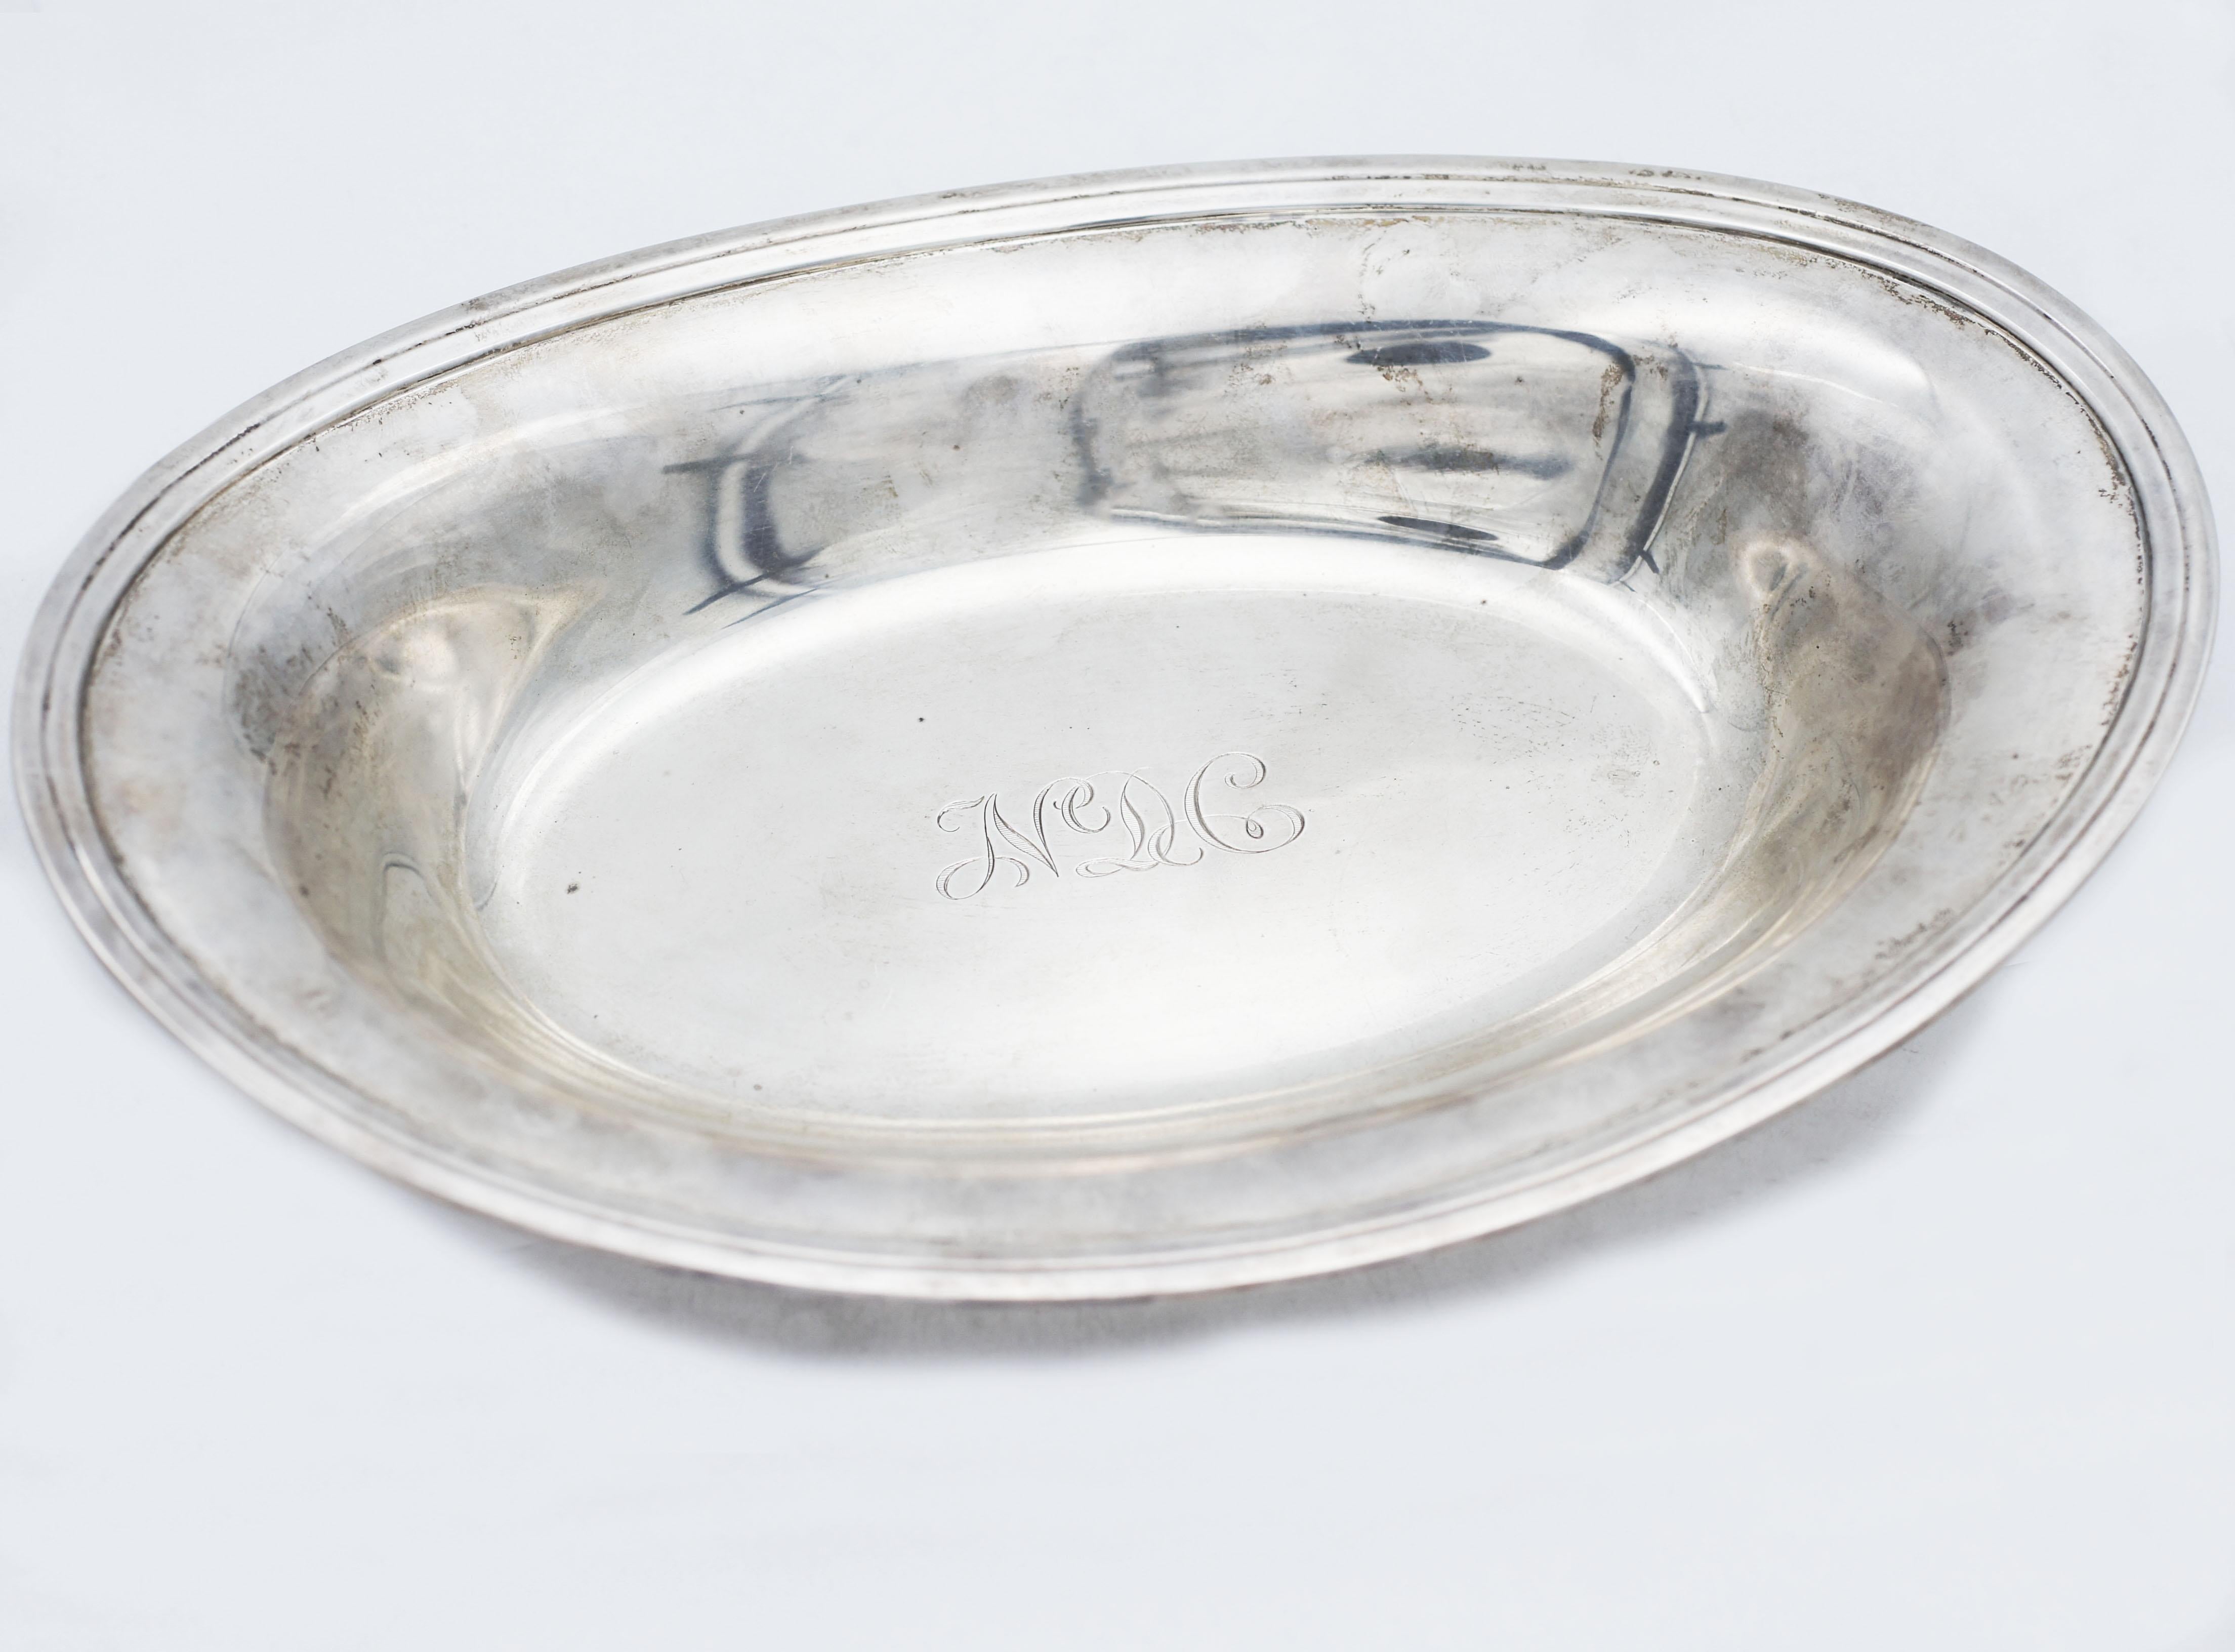 tiffany and co serving platter